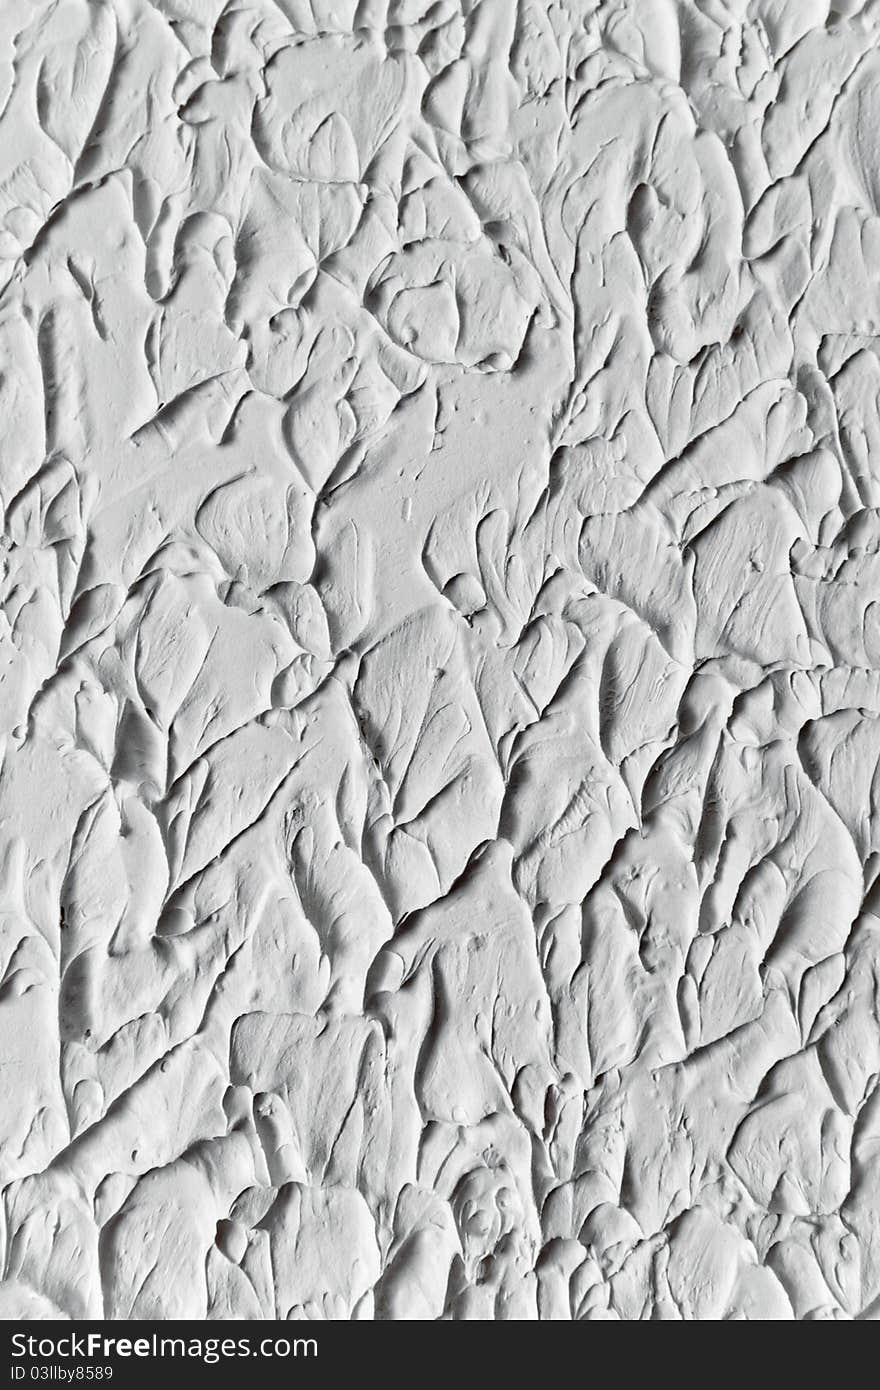 Grey Texture plaster, Can be used as a background. Grey Texture plaster, Can be used as a background.